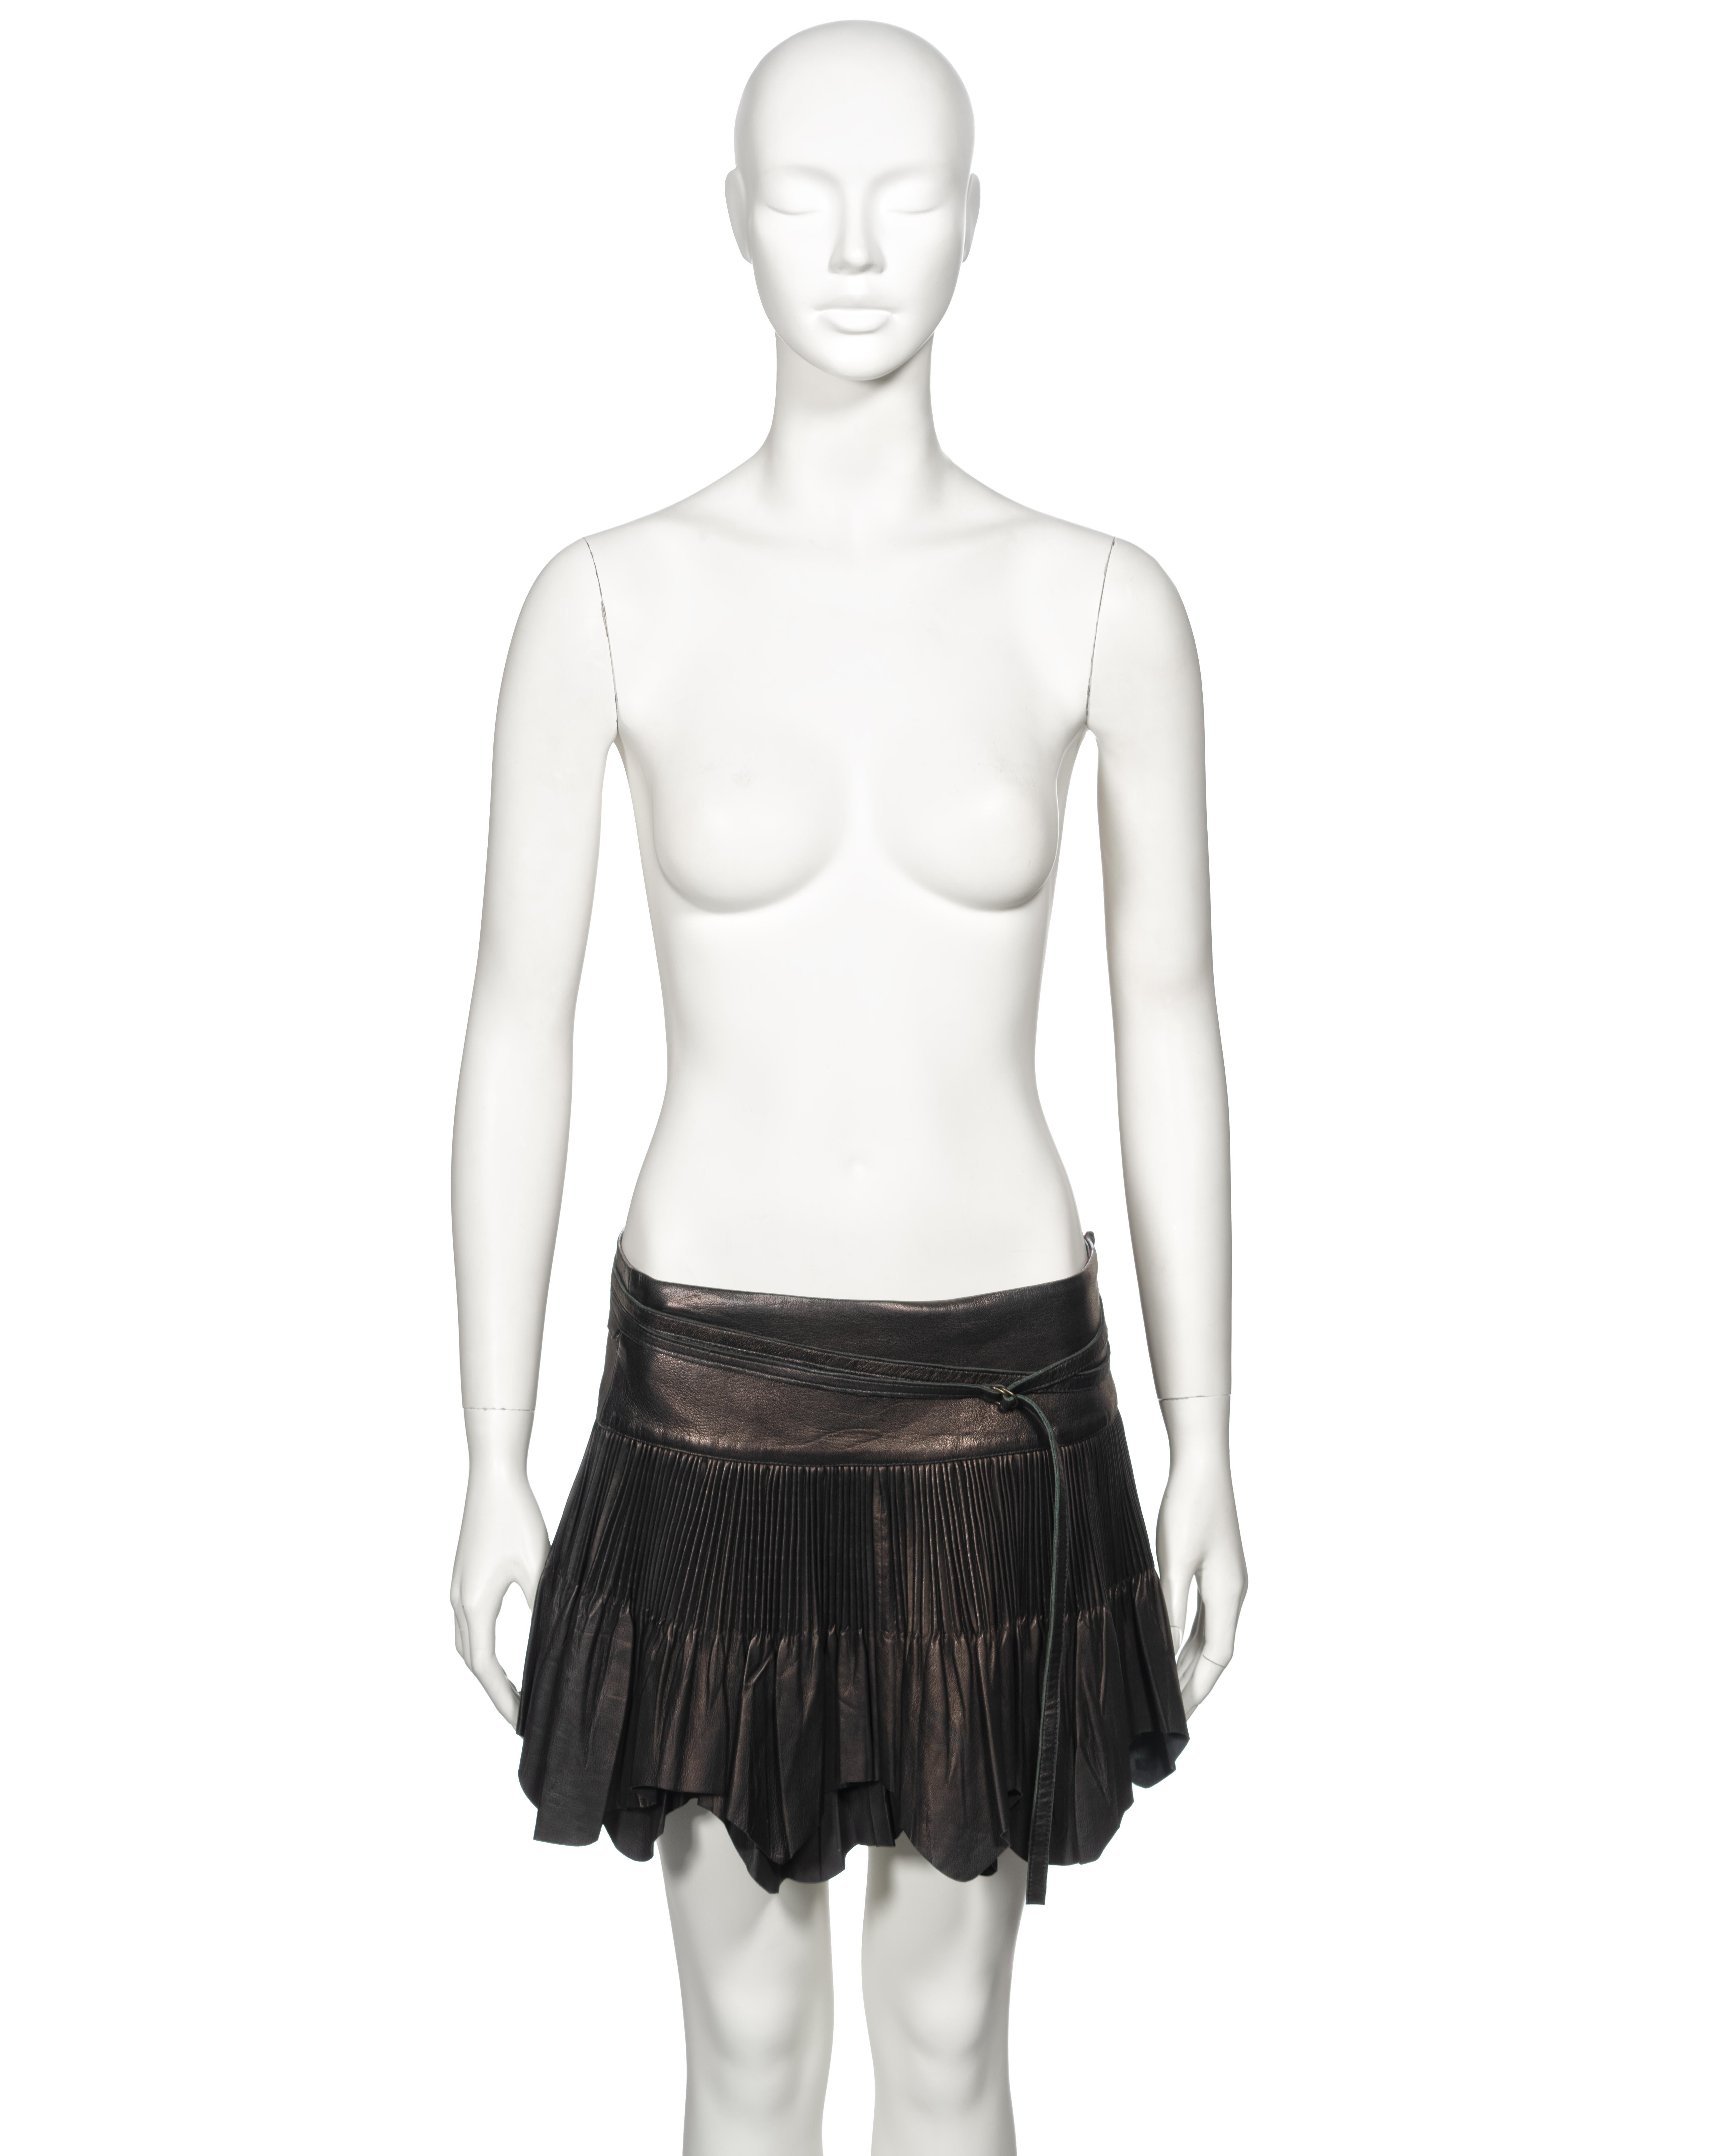 ▪ Archival Jean Paul Gaultier Leather Mini Skirt 
▪ Fall-Winter 2003
▪ Sold by One of a Kind Archive
▪ Constructed from black leather
▪ Cartridge pleats 
▪ Raw-edge hem 
▪ Self-tie wrap fastening
▪ IT40 - FR36 - UK8
▪ Made in Italy

The photographs